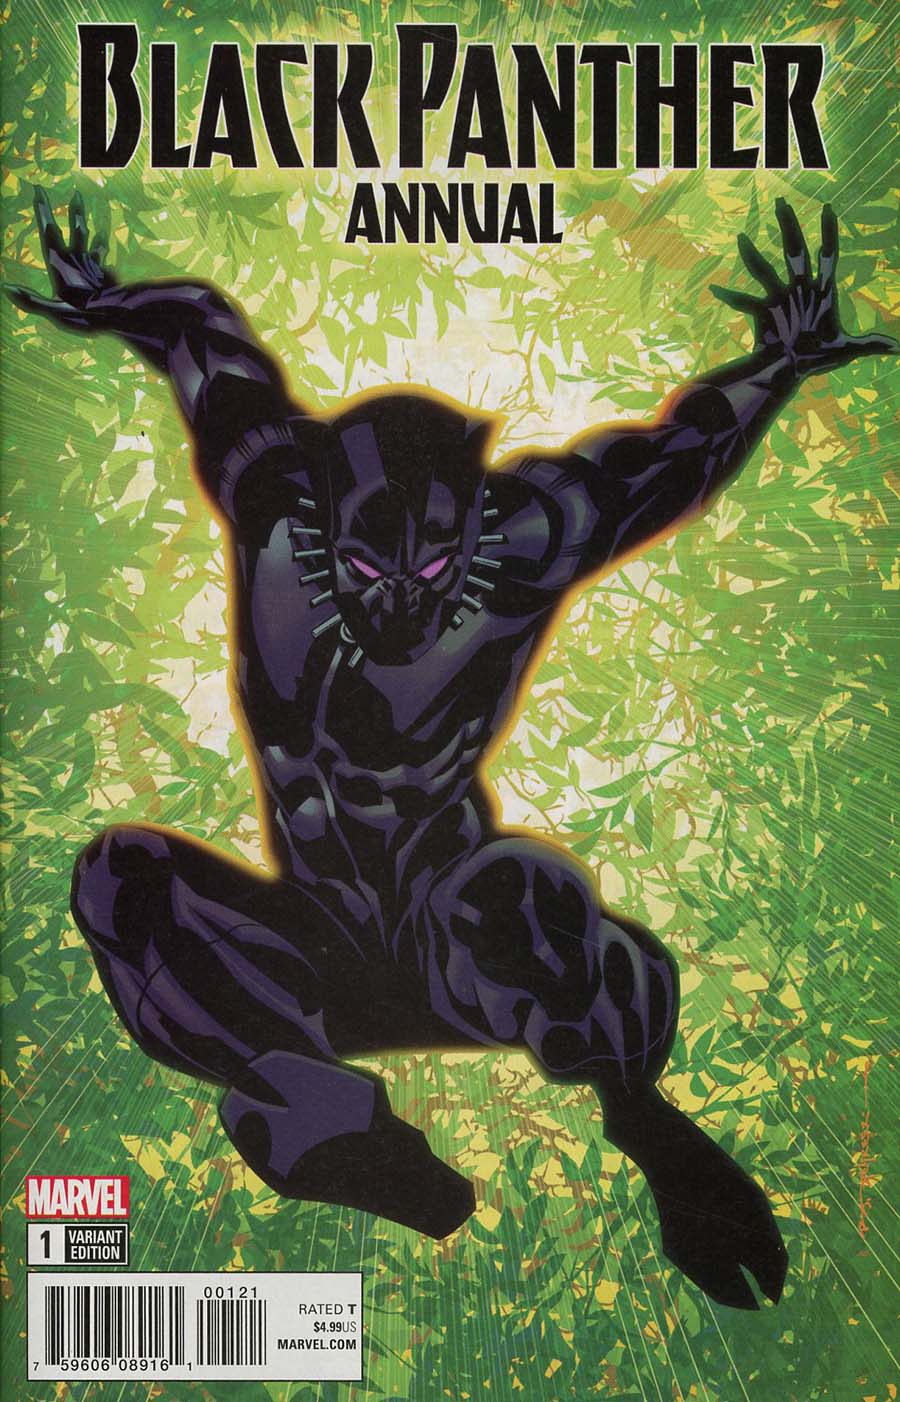 Black Panther Vol 6 Annual #1 Cover B Variant Brian Stelfreeze Cover (Marvel Legacy Tie-In)